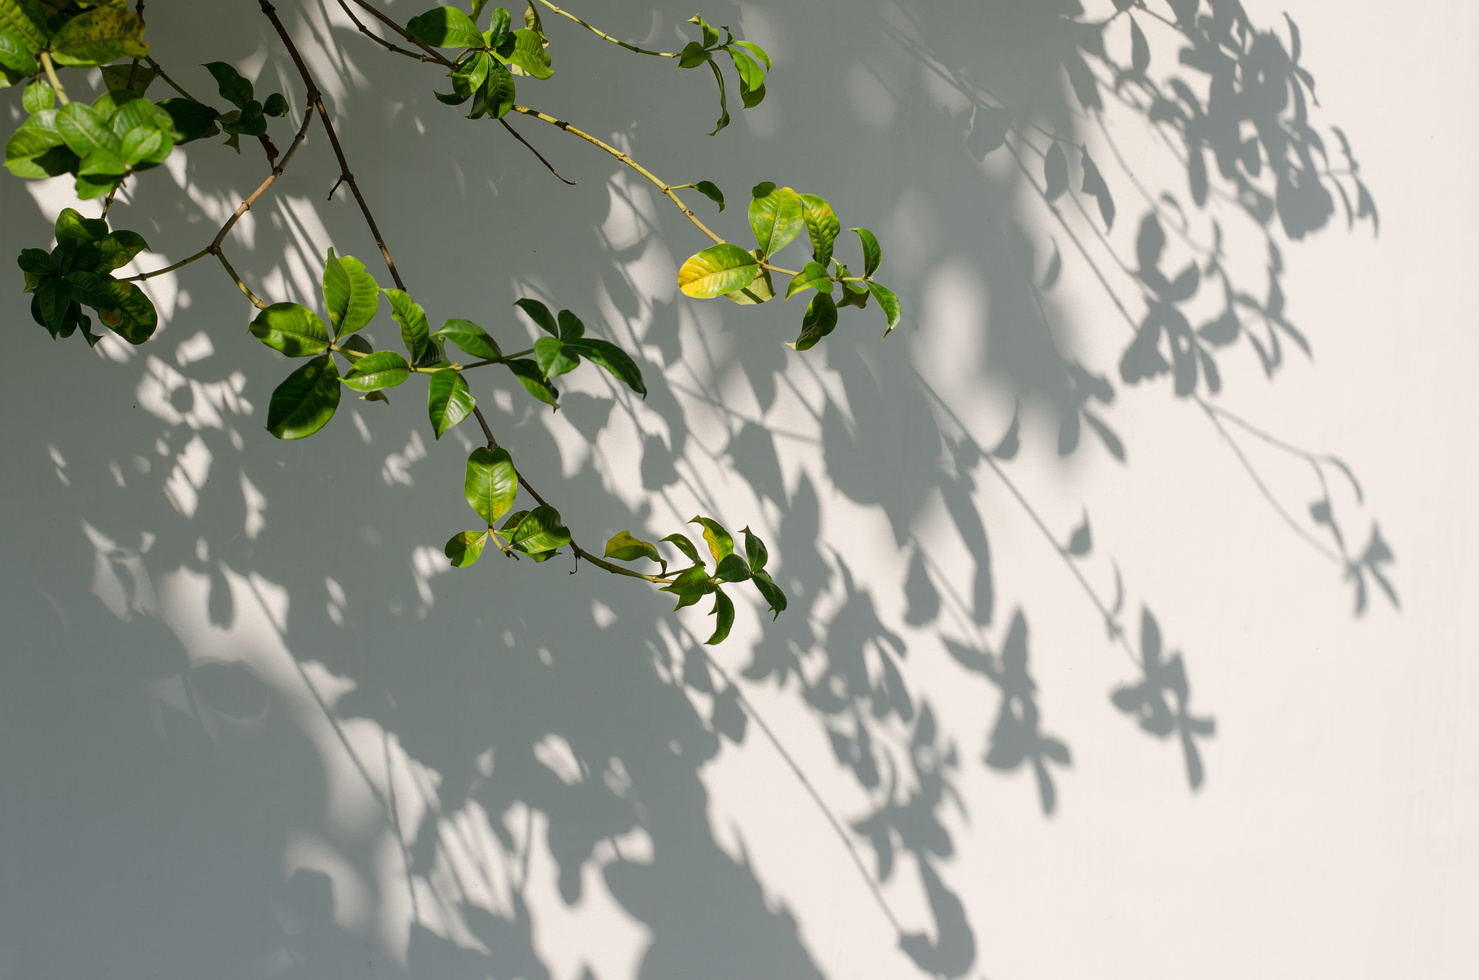 Leaves shadow on the wall.